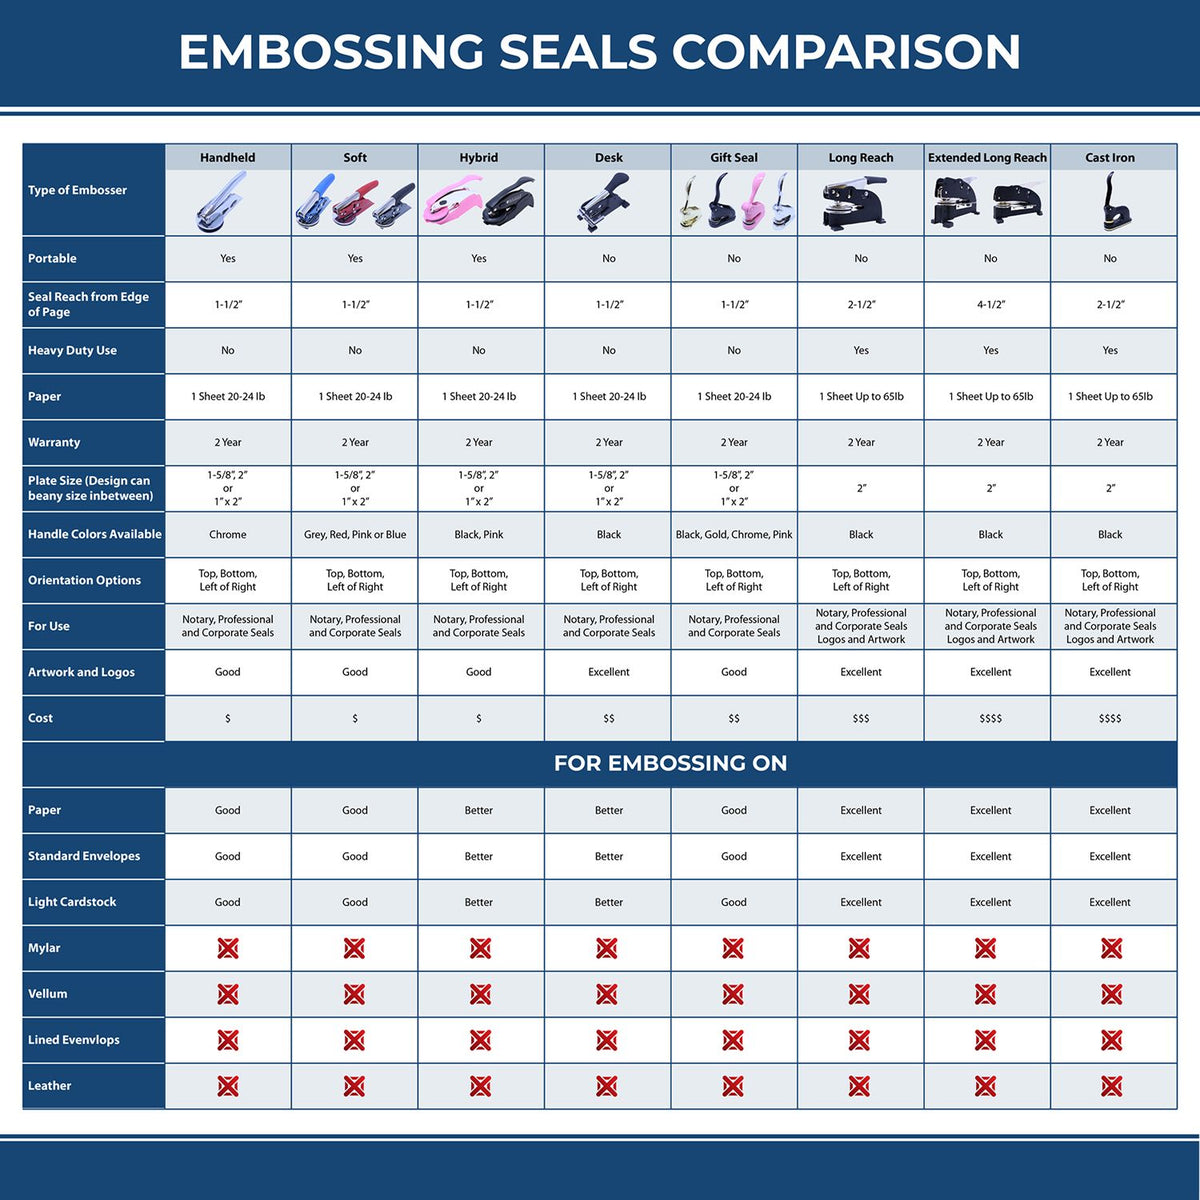 A comparison chart for the different types of mount models available for the Handheld Louisiana Professional Geologist Embosser